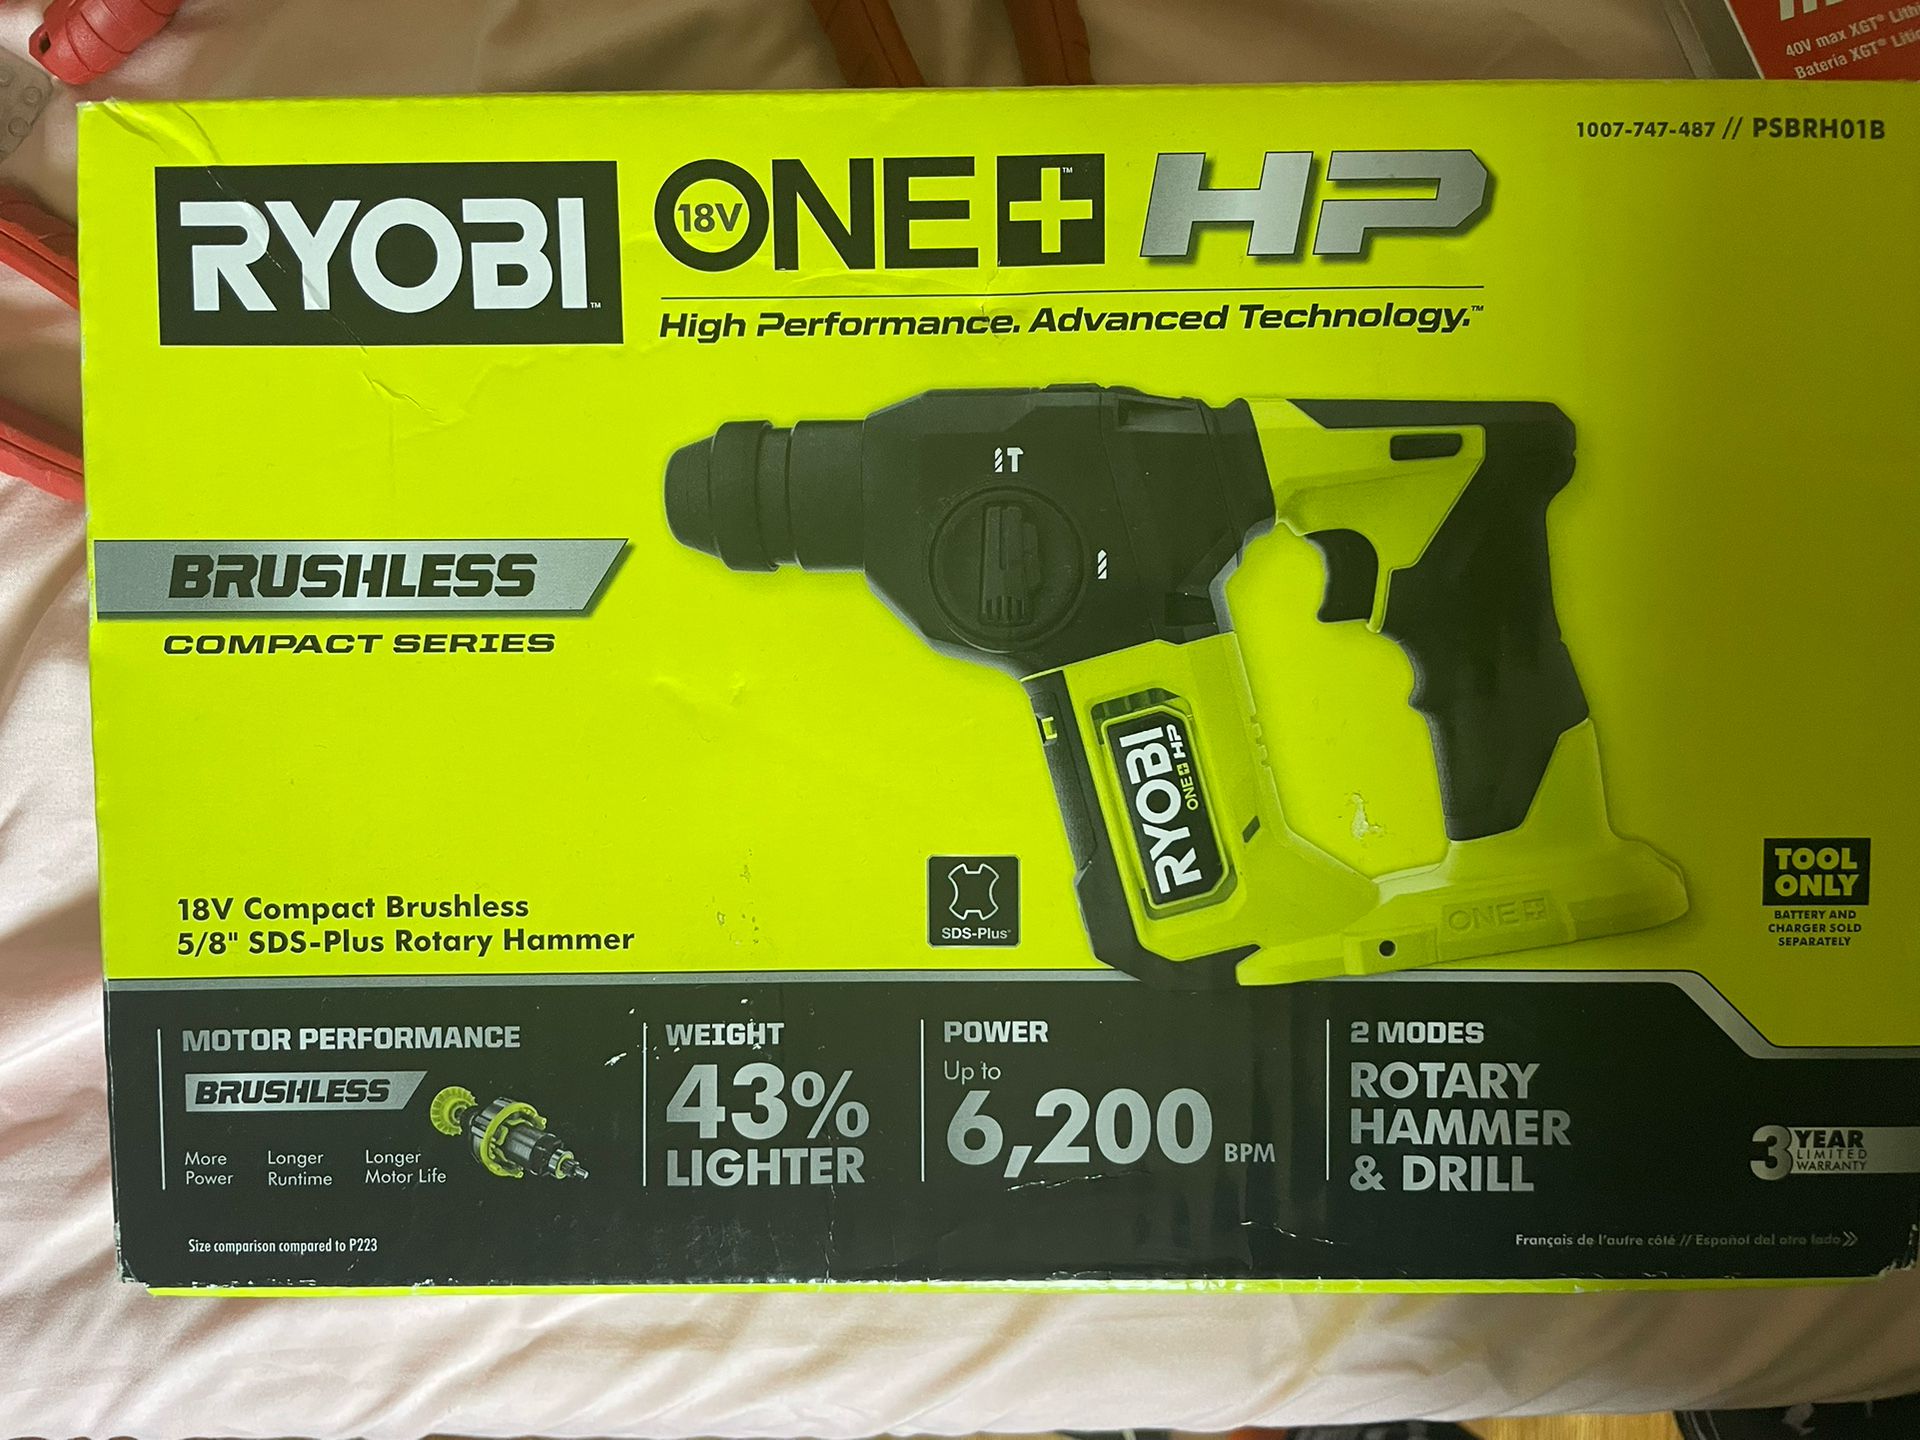 RYOBI ONE+ HP 18V Brushless Cordless Compact 5/8 in. SDS Rotary Hammer (Tool Only)